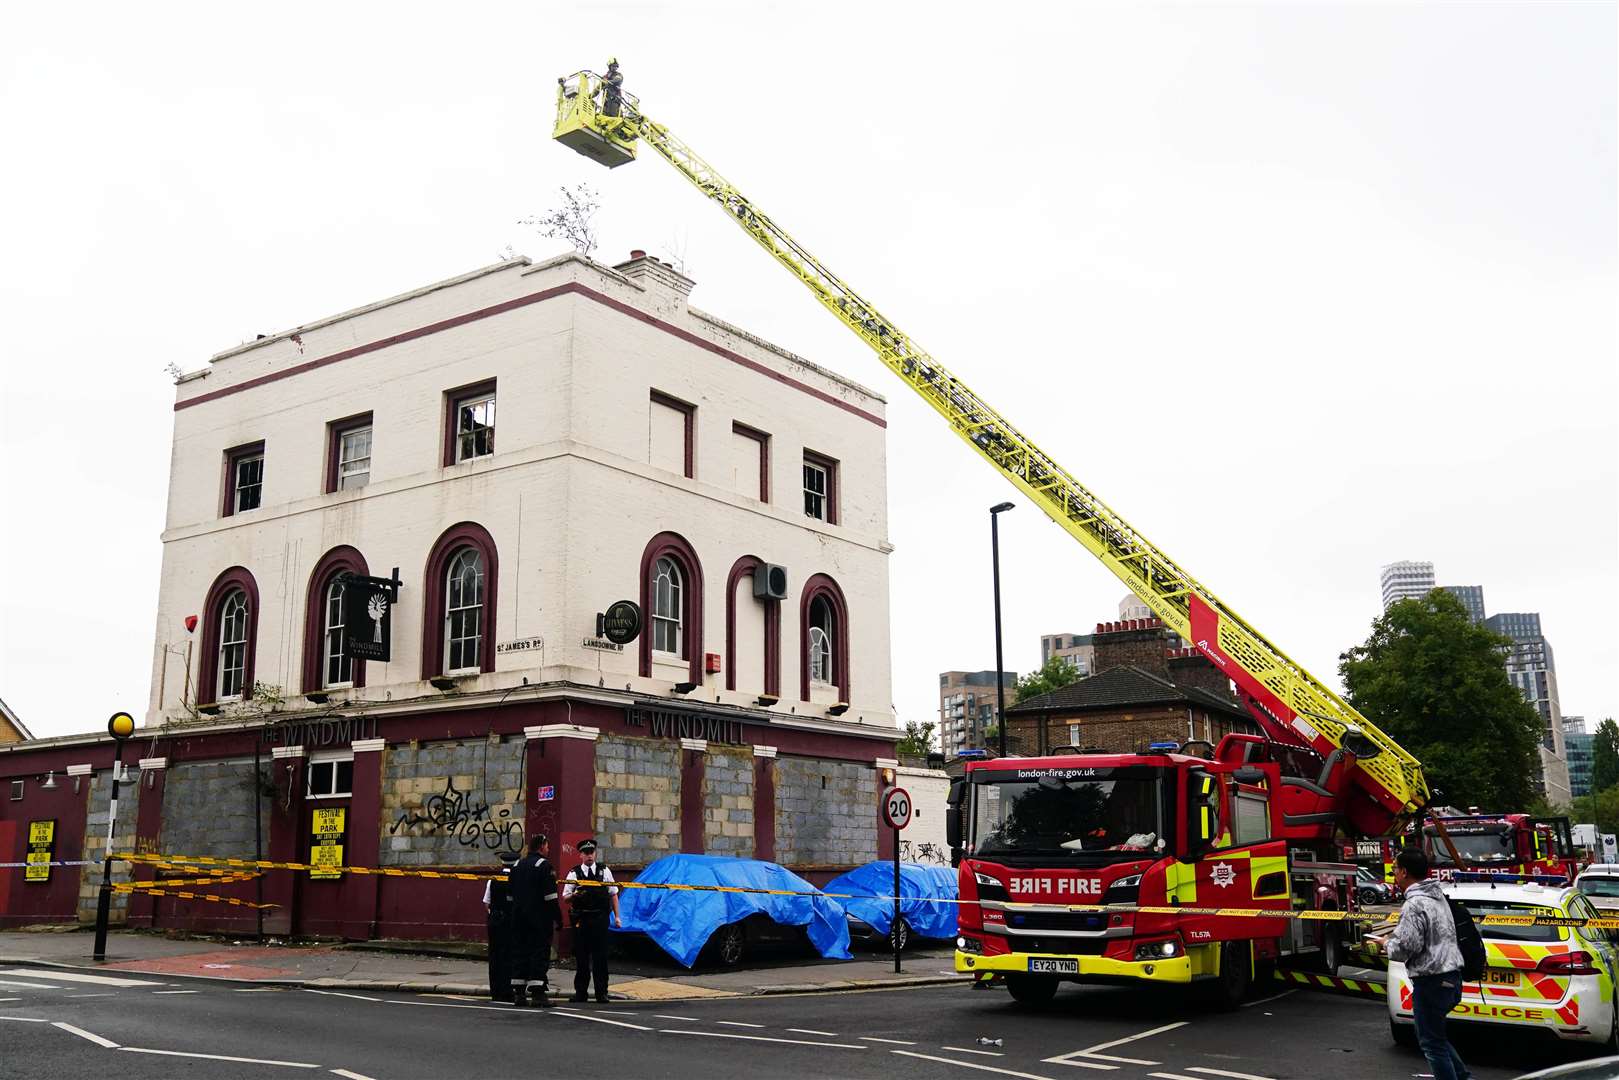 Emergency services attend a fire at the former Windmill pub in St James’s Road in Croydon (Victoria Jones/PA)